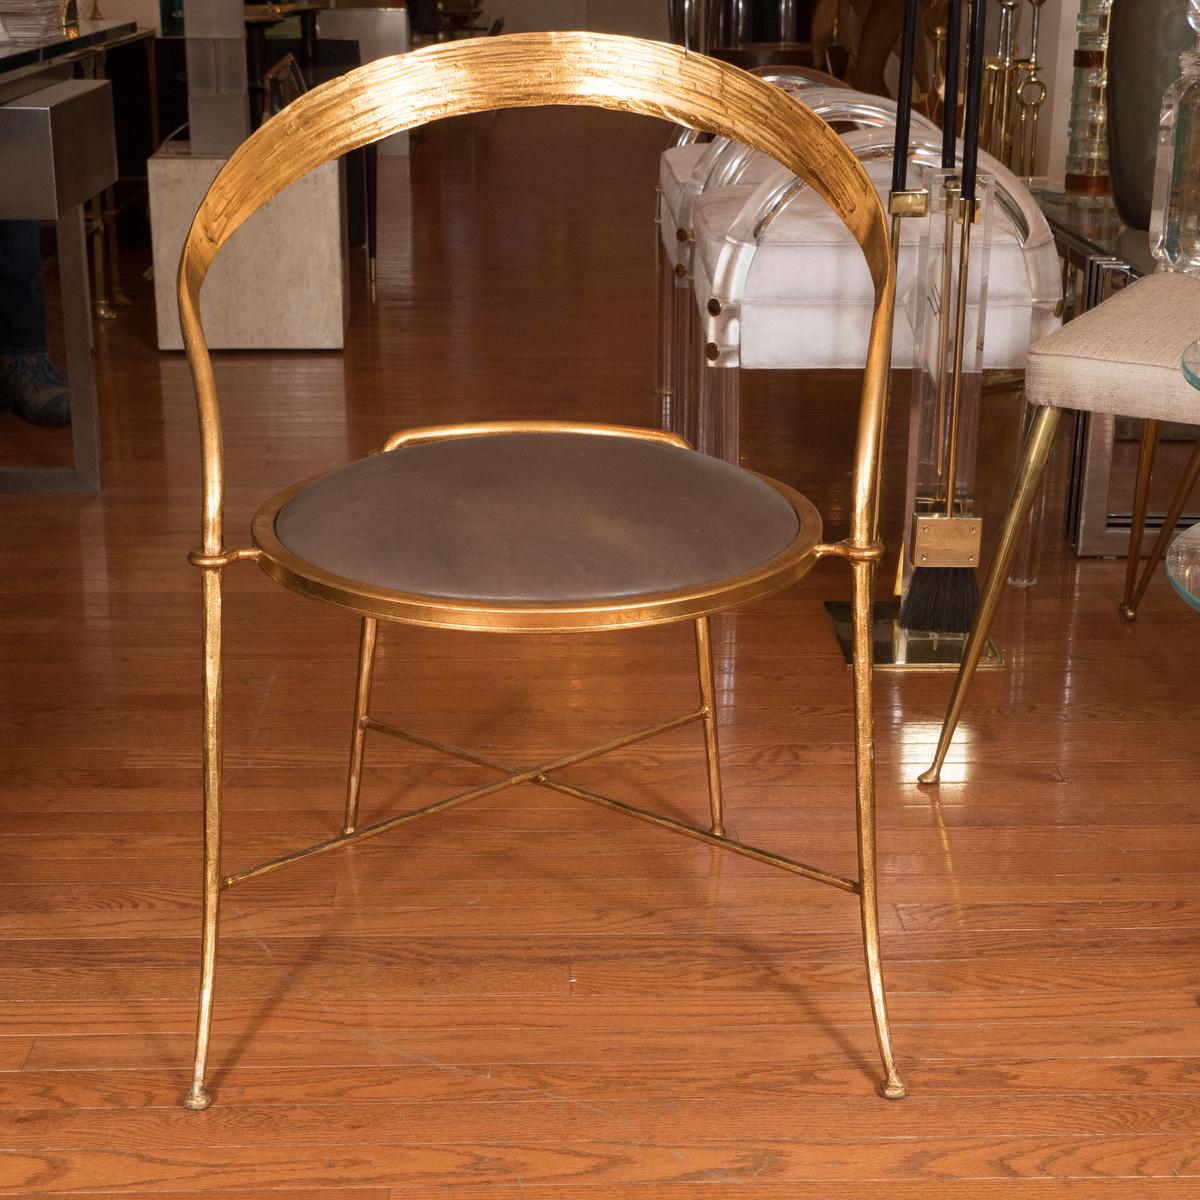 Pair of gilt metal, sculptural chairs with upholstered seats.